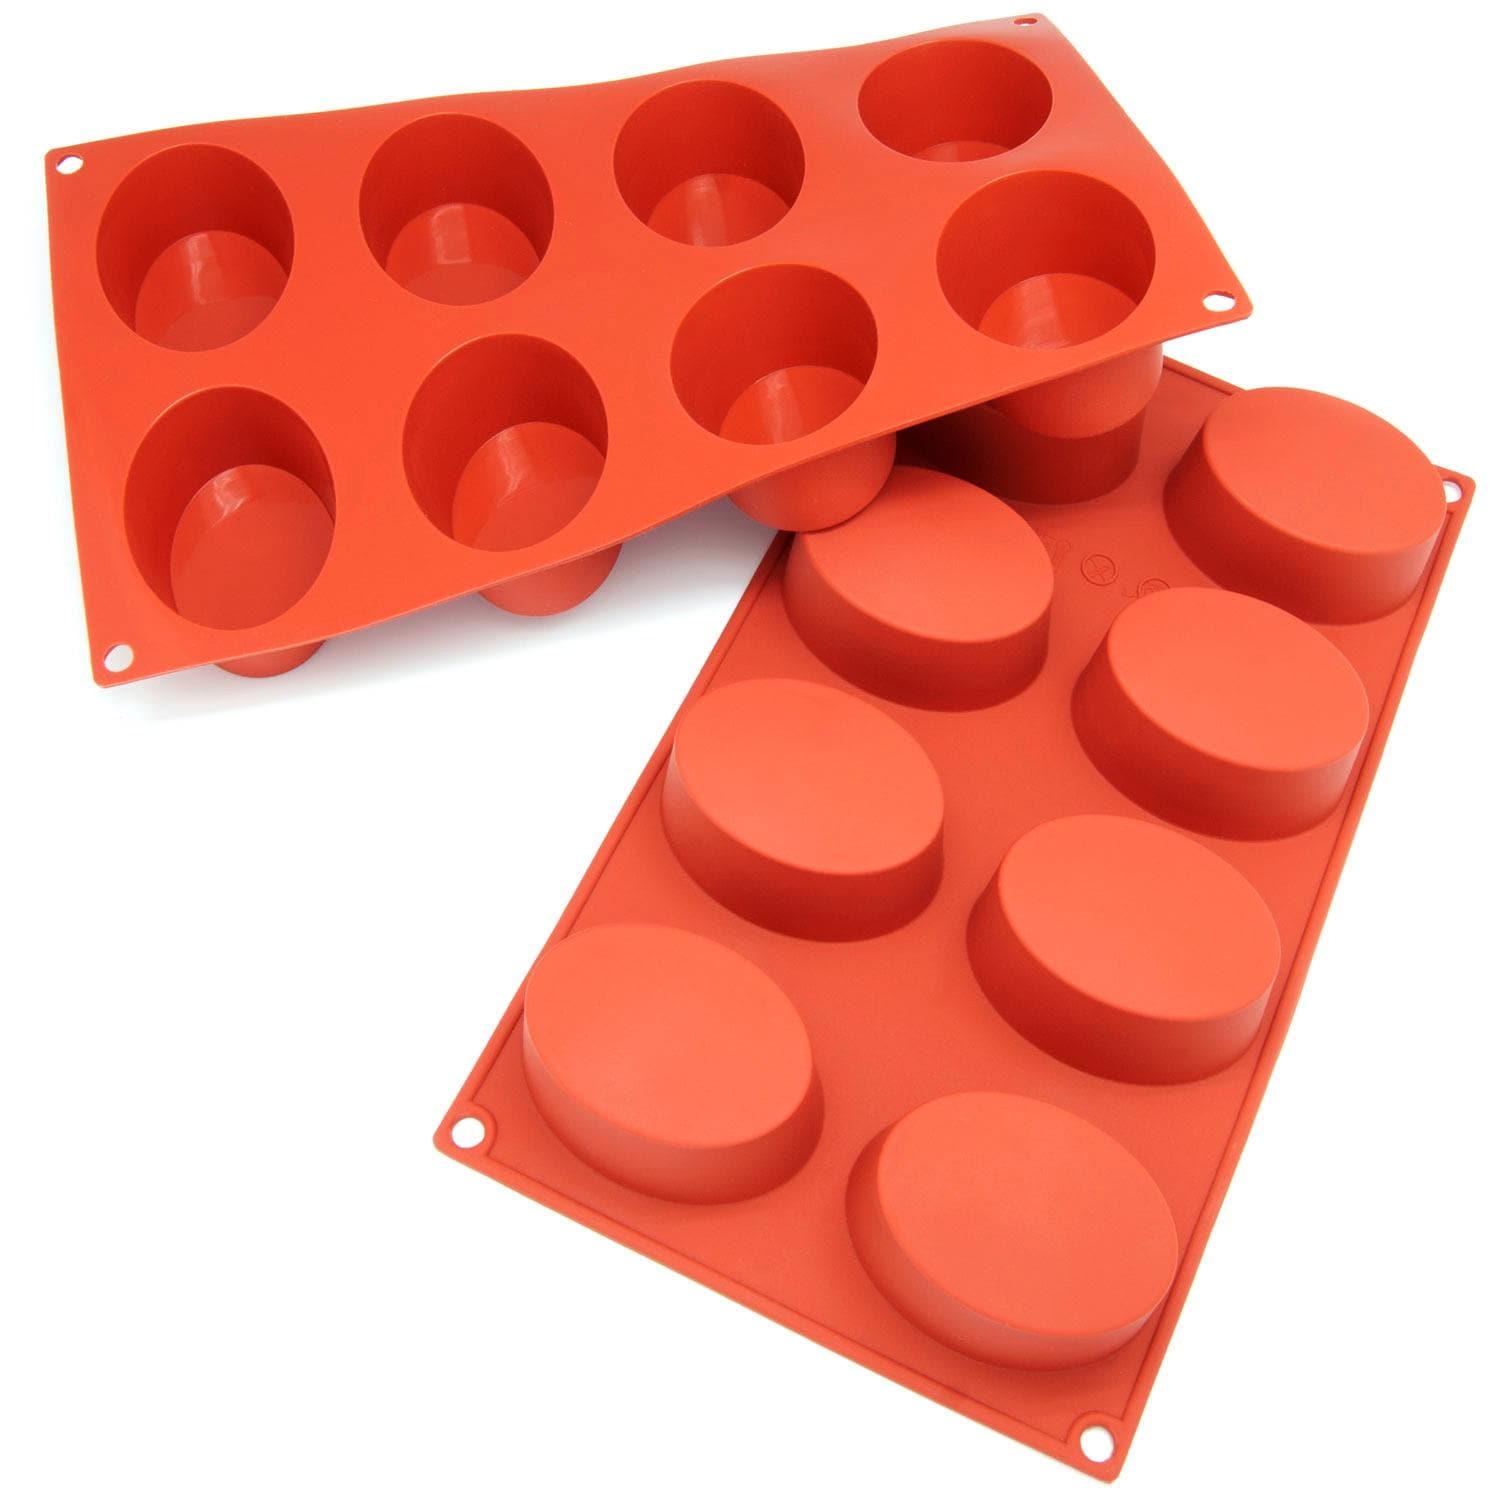 2 Pack Silicone Soap Molds, 6 Cavities Silicone Baking Mold Cake Pan